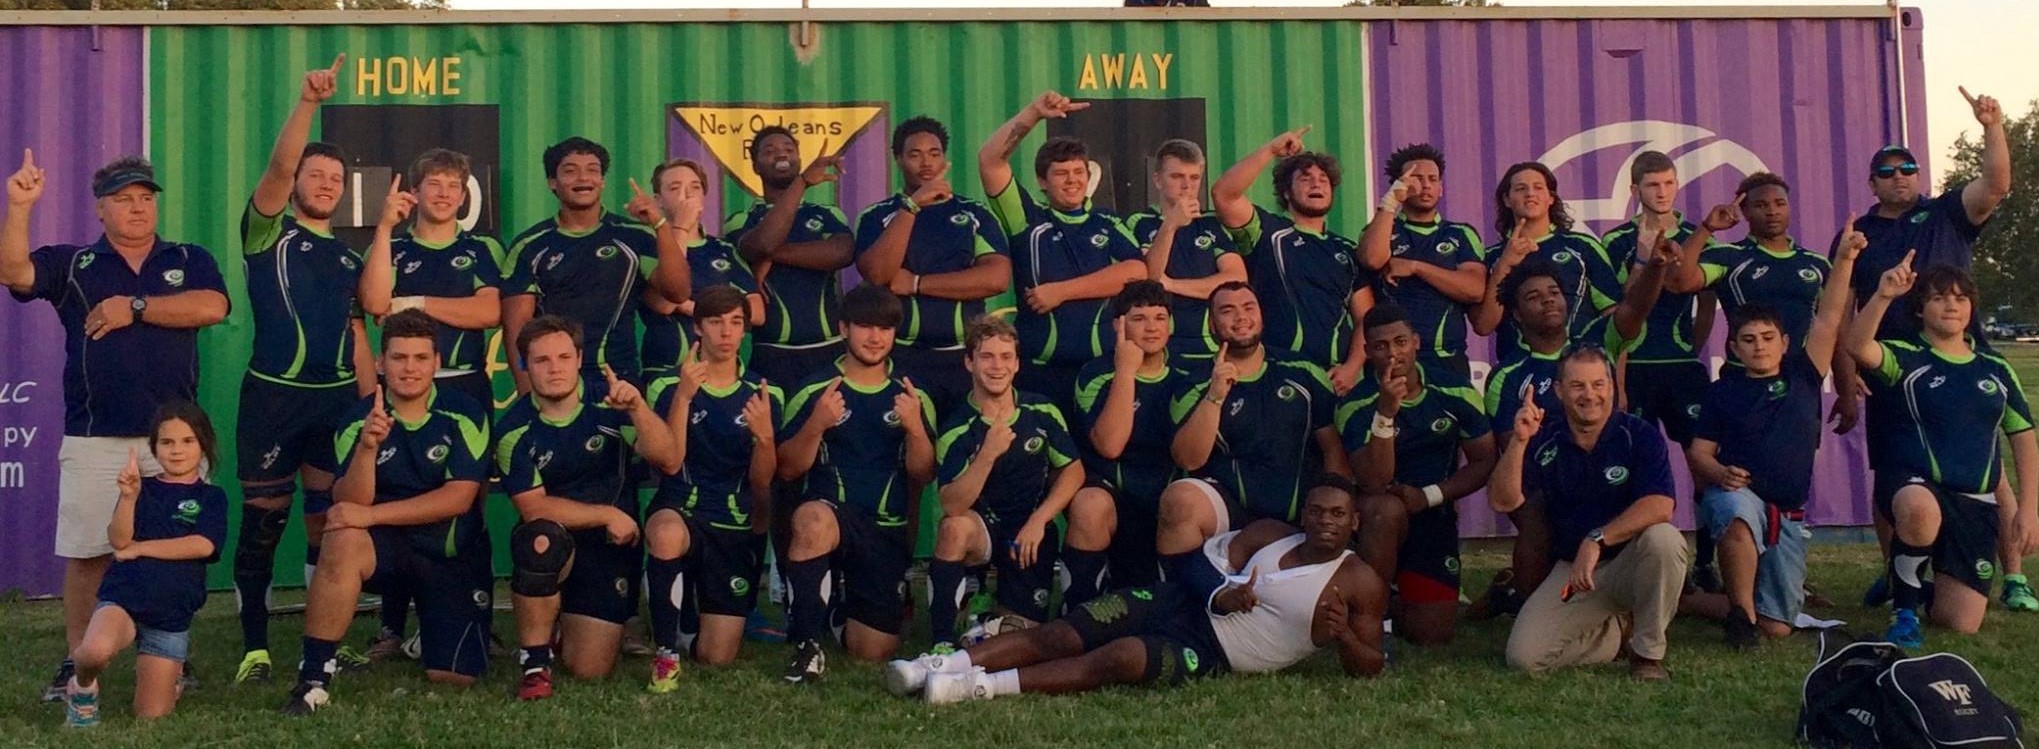 Bayou Hurricanes Team Photo; photo by Rugby Commons